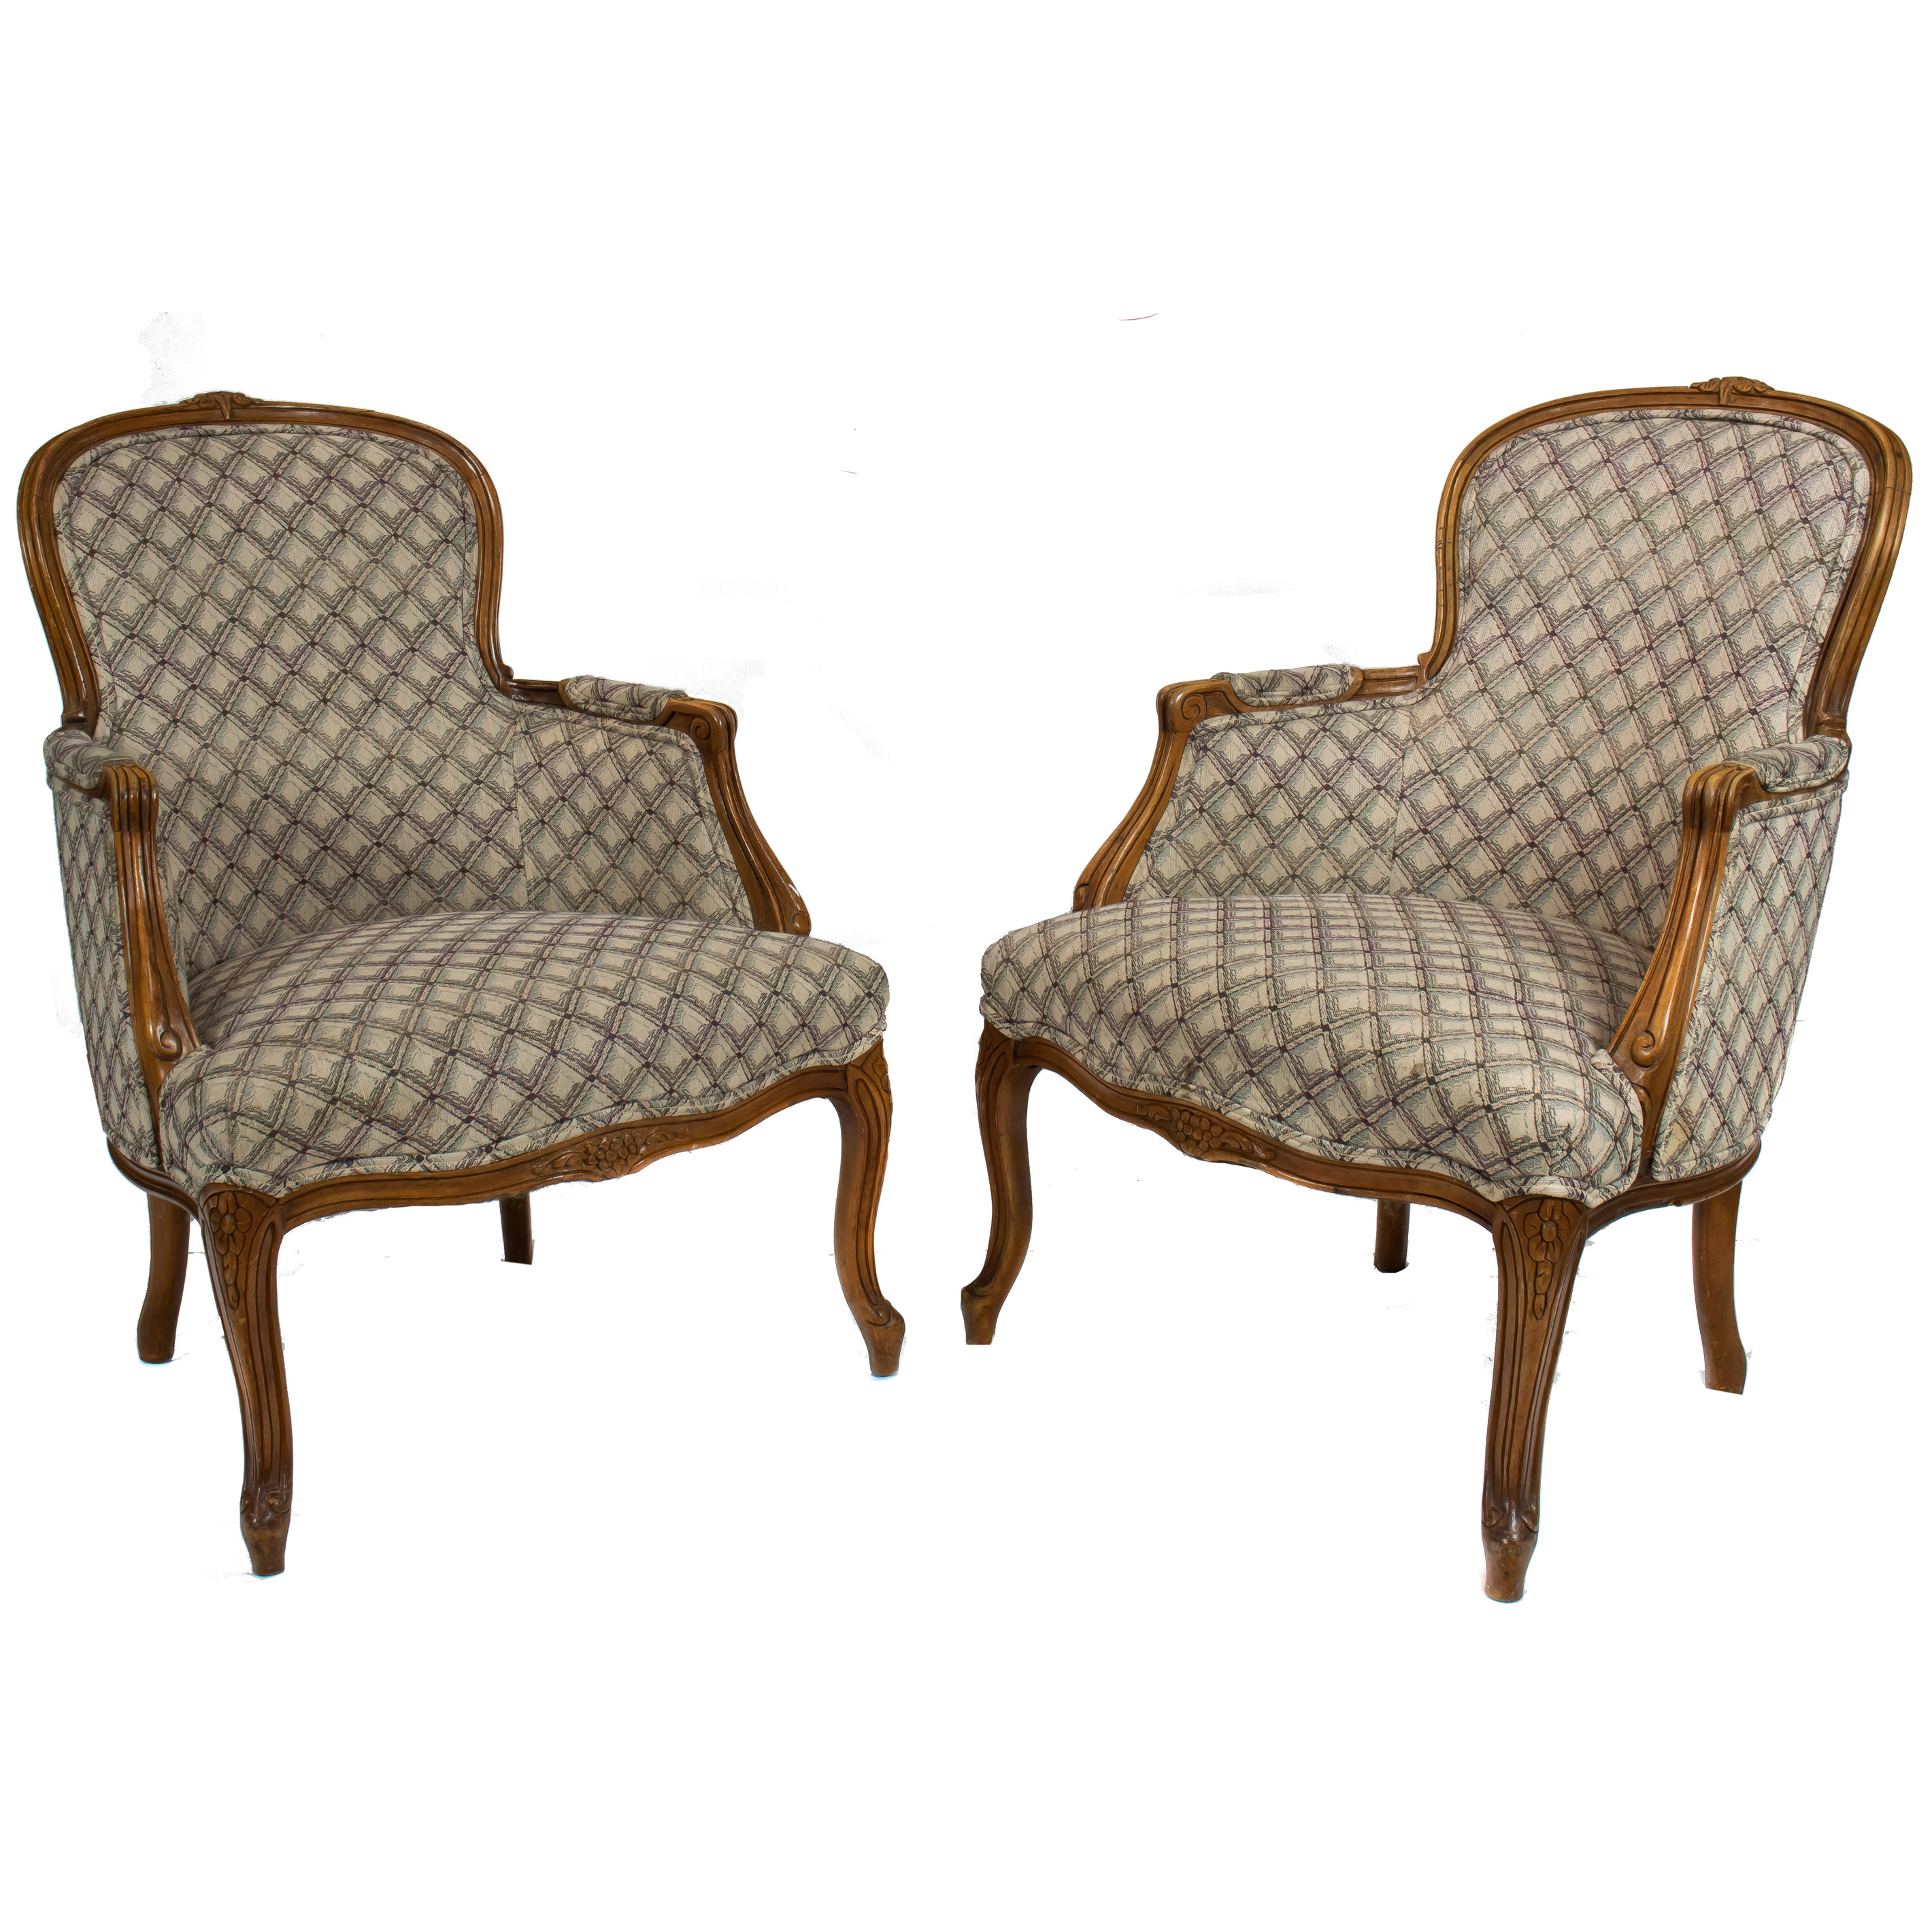 A PAIR OF FRENCH PROVINCIAL STYLE BERGERES